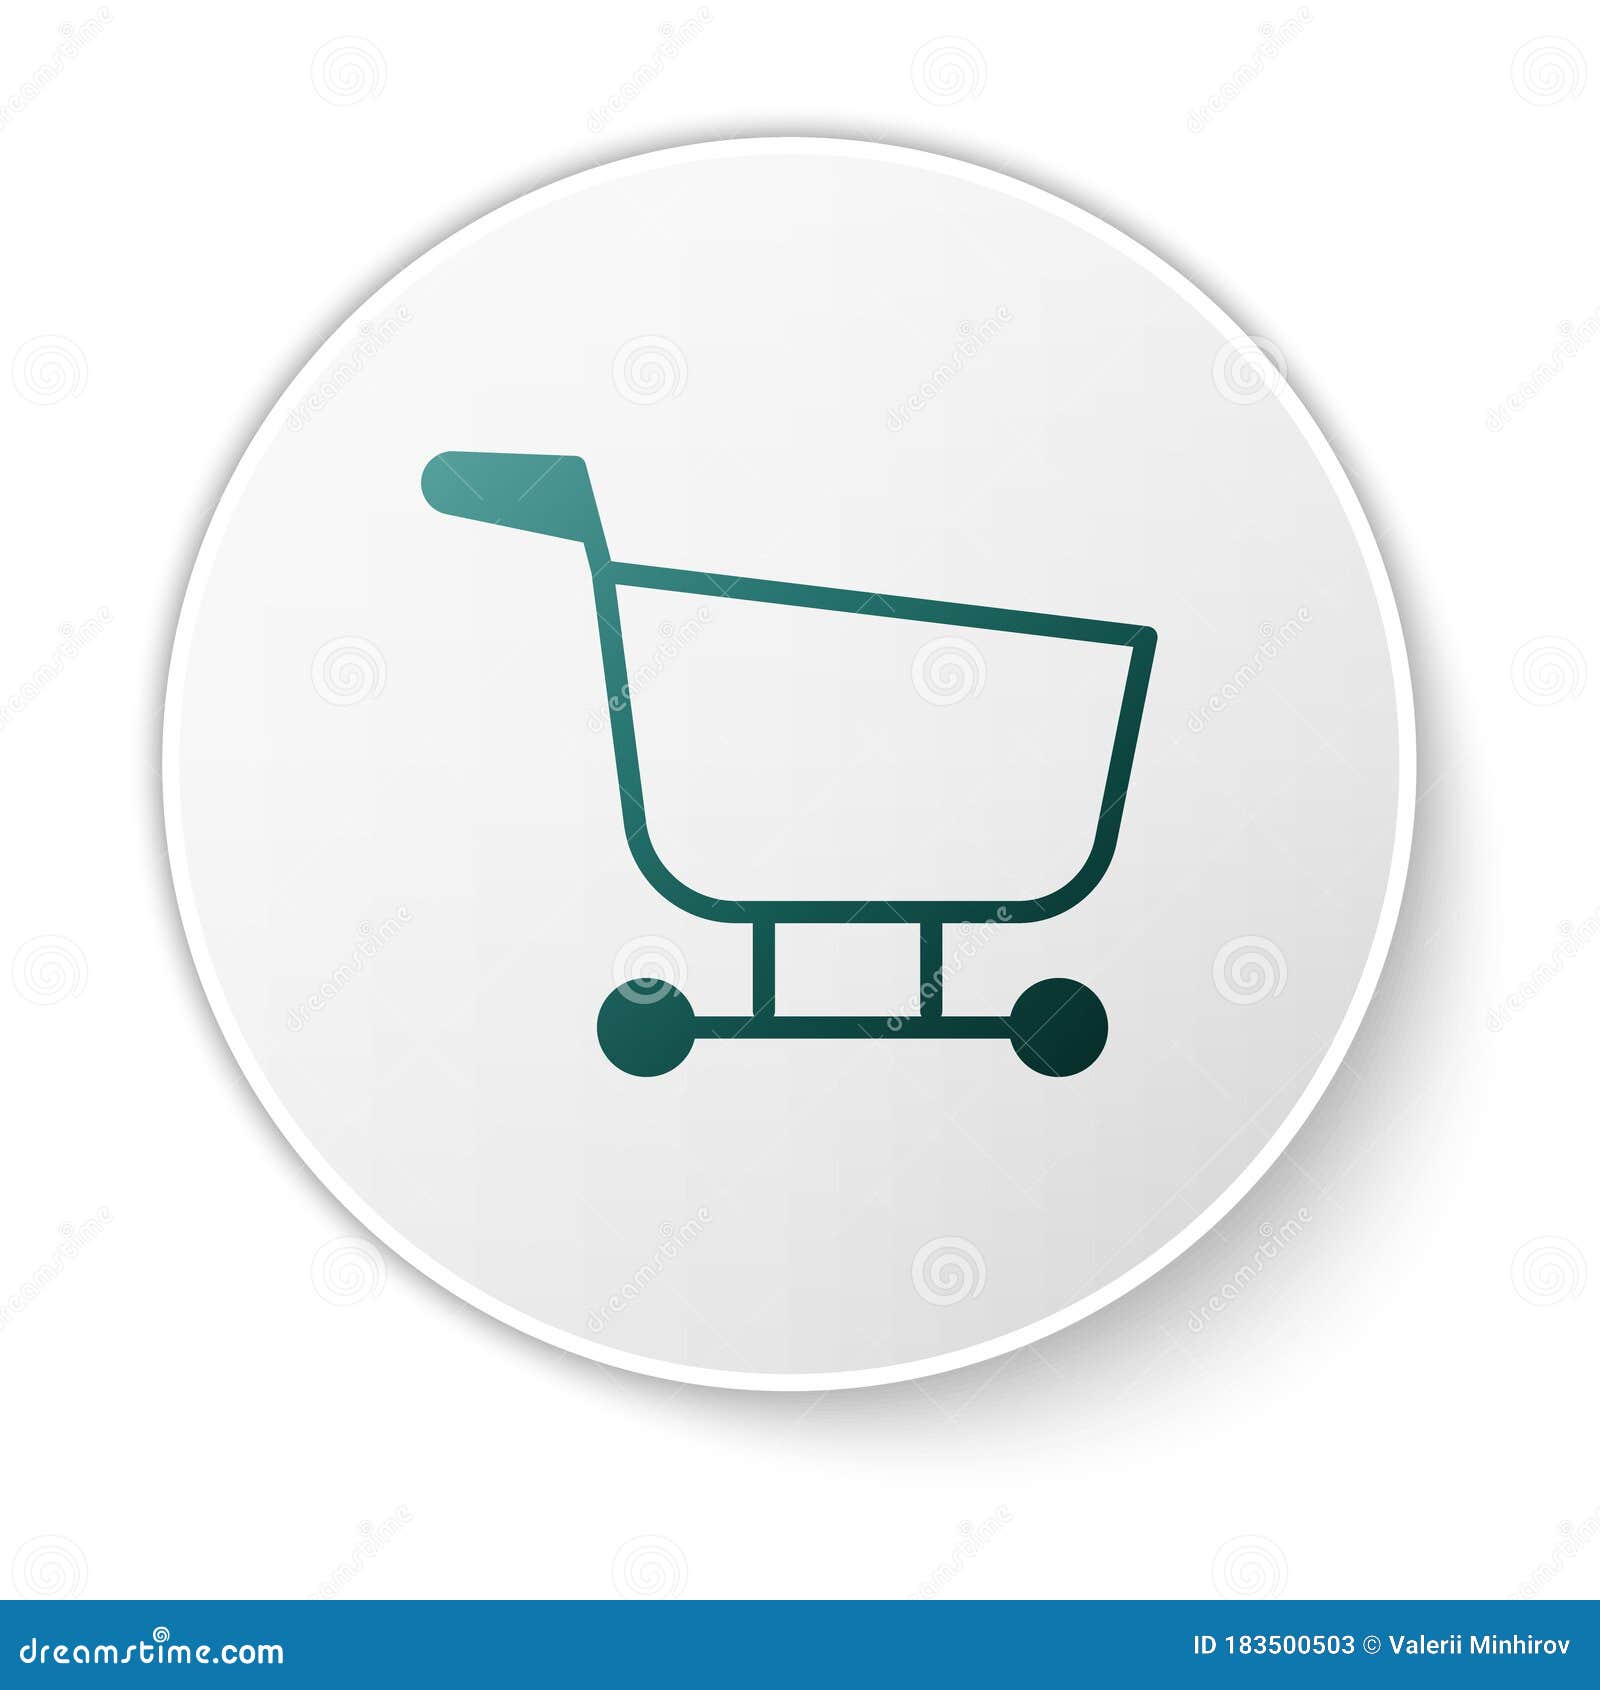 Green Shopping Cart Icon Isolated on White Background. Food Store,  Supermarket. White Circle Button Stock Vector - Illustration of organic,  grocery: 183500503